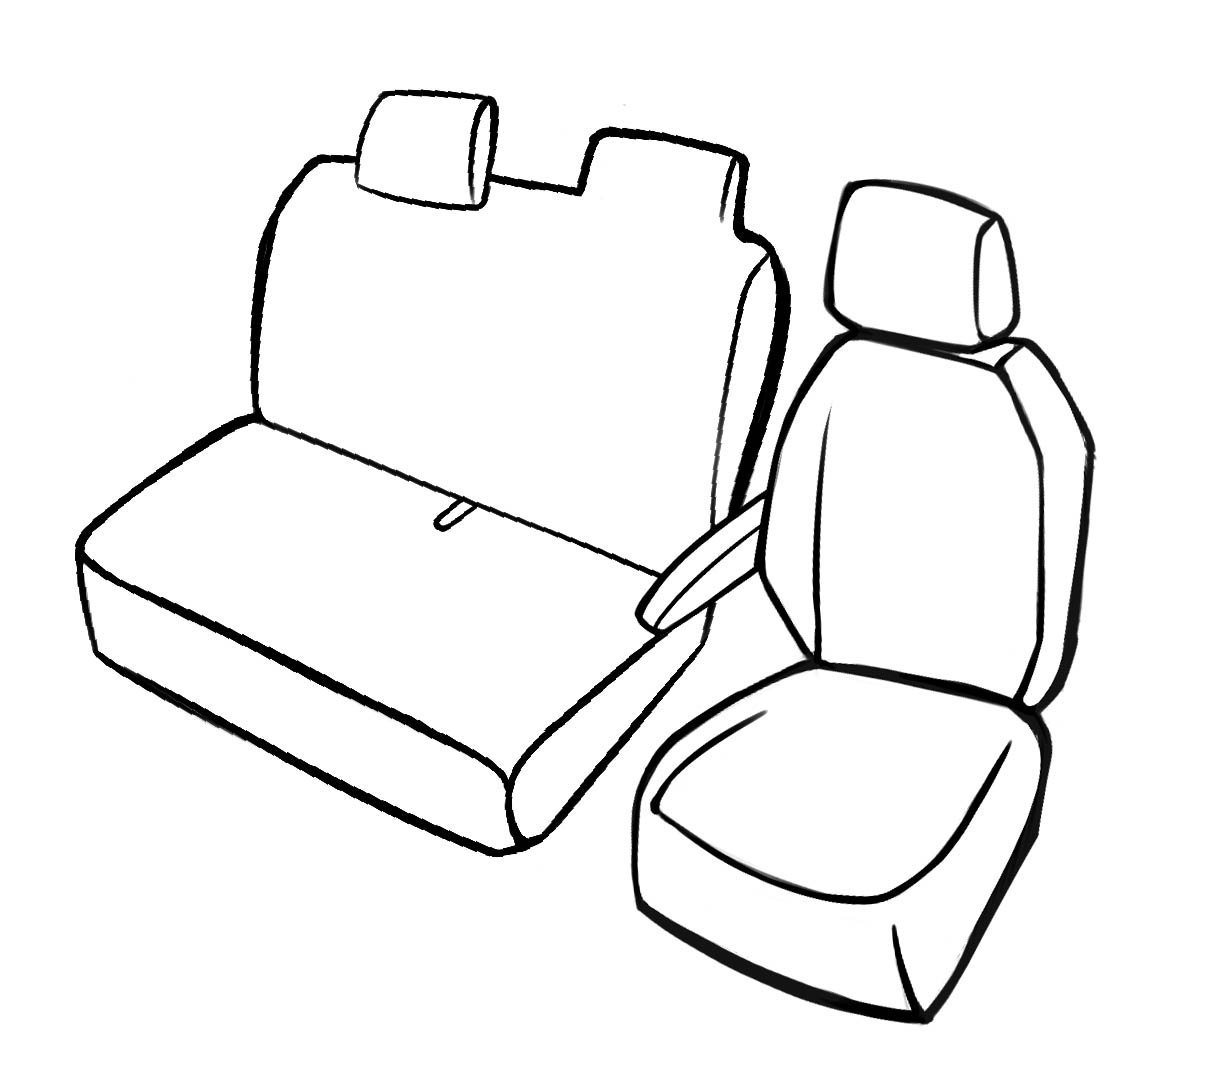 Premium Seat Cover for VW T4 1990-2004, 1 single seat cover front + armrest cover, 1 double bench cover